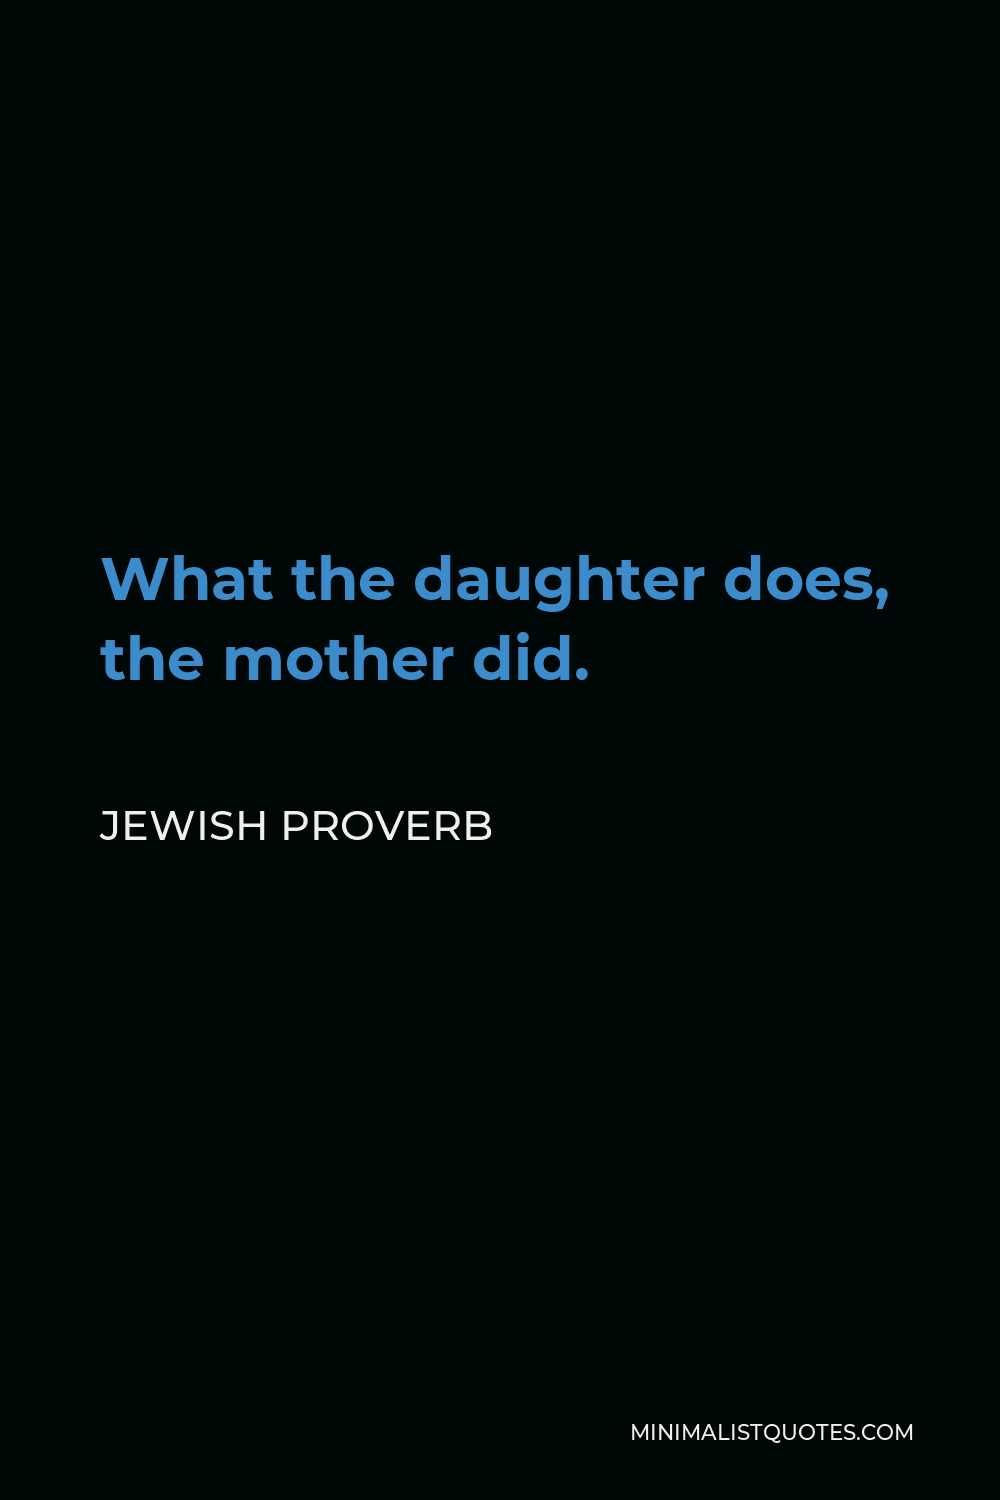 Jewish Proverb Quote - What the daughter does, the mother did.